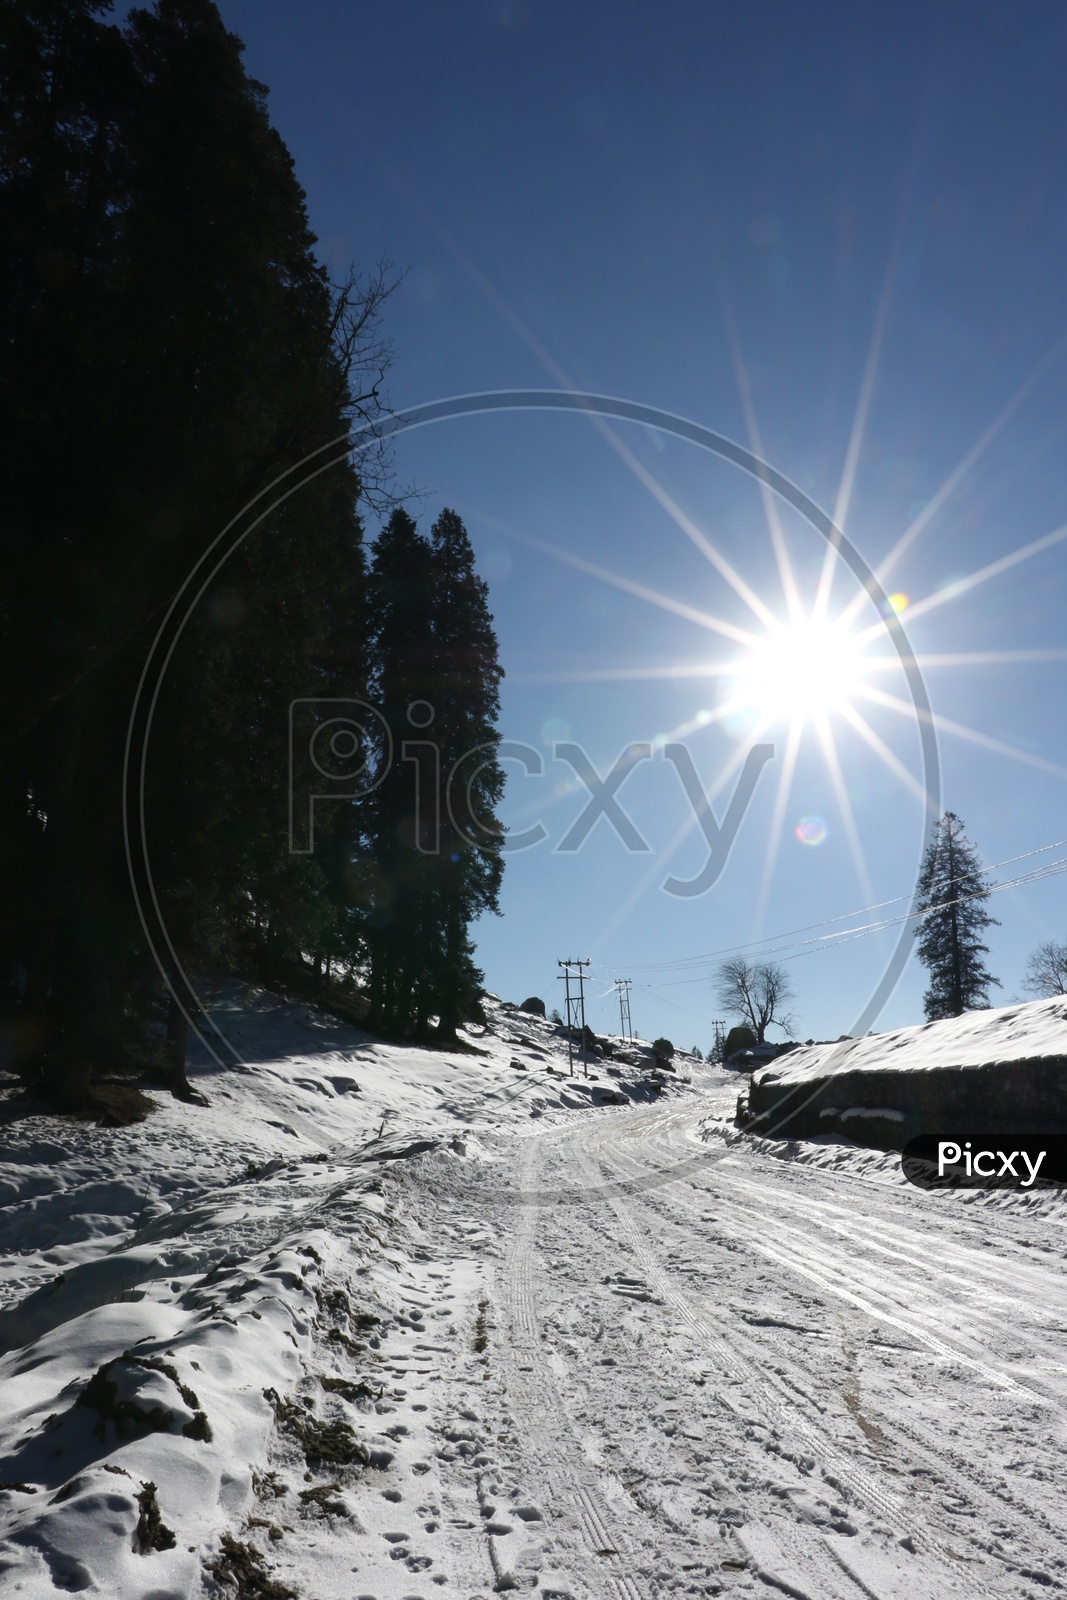 Roads with full of snow and a bright sun